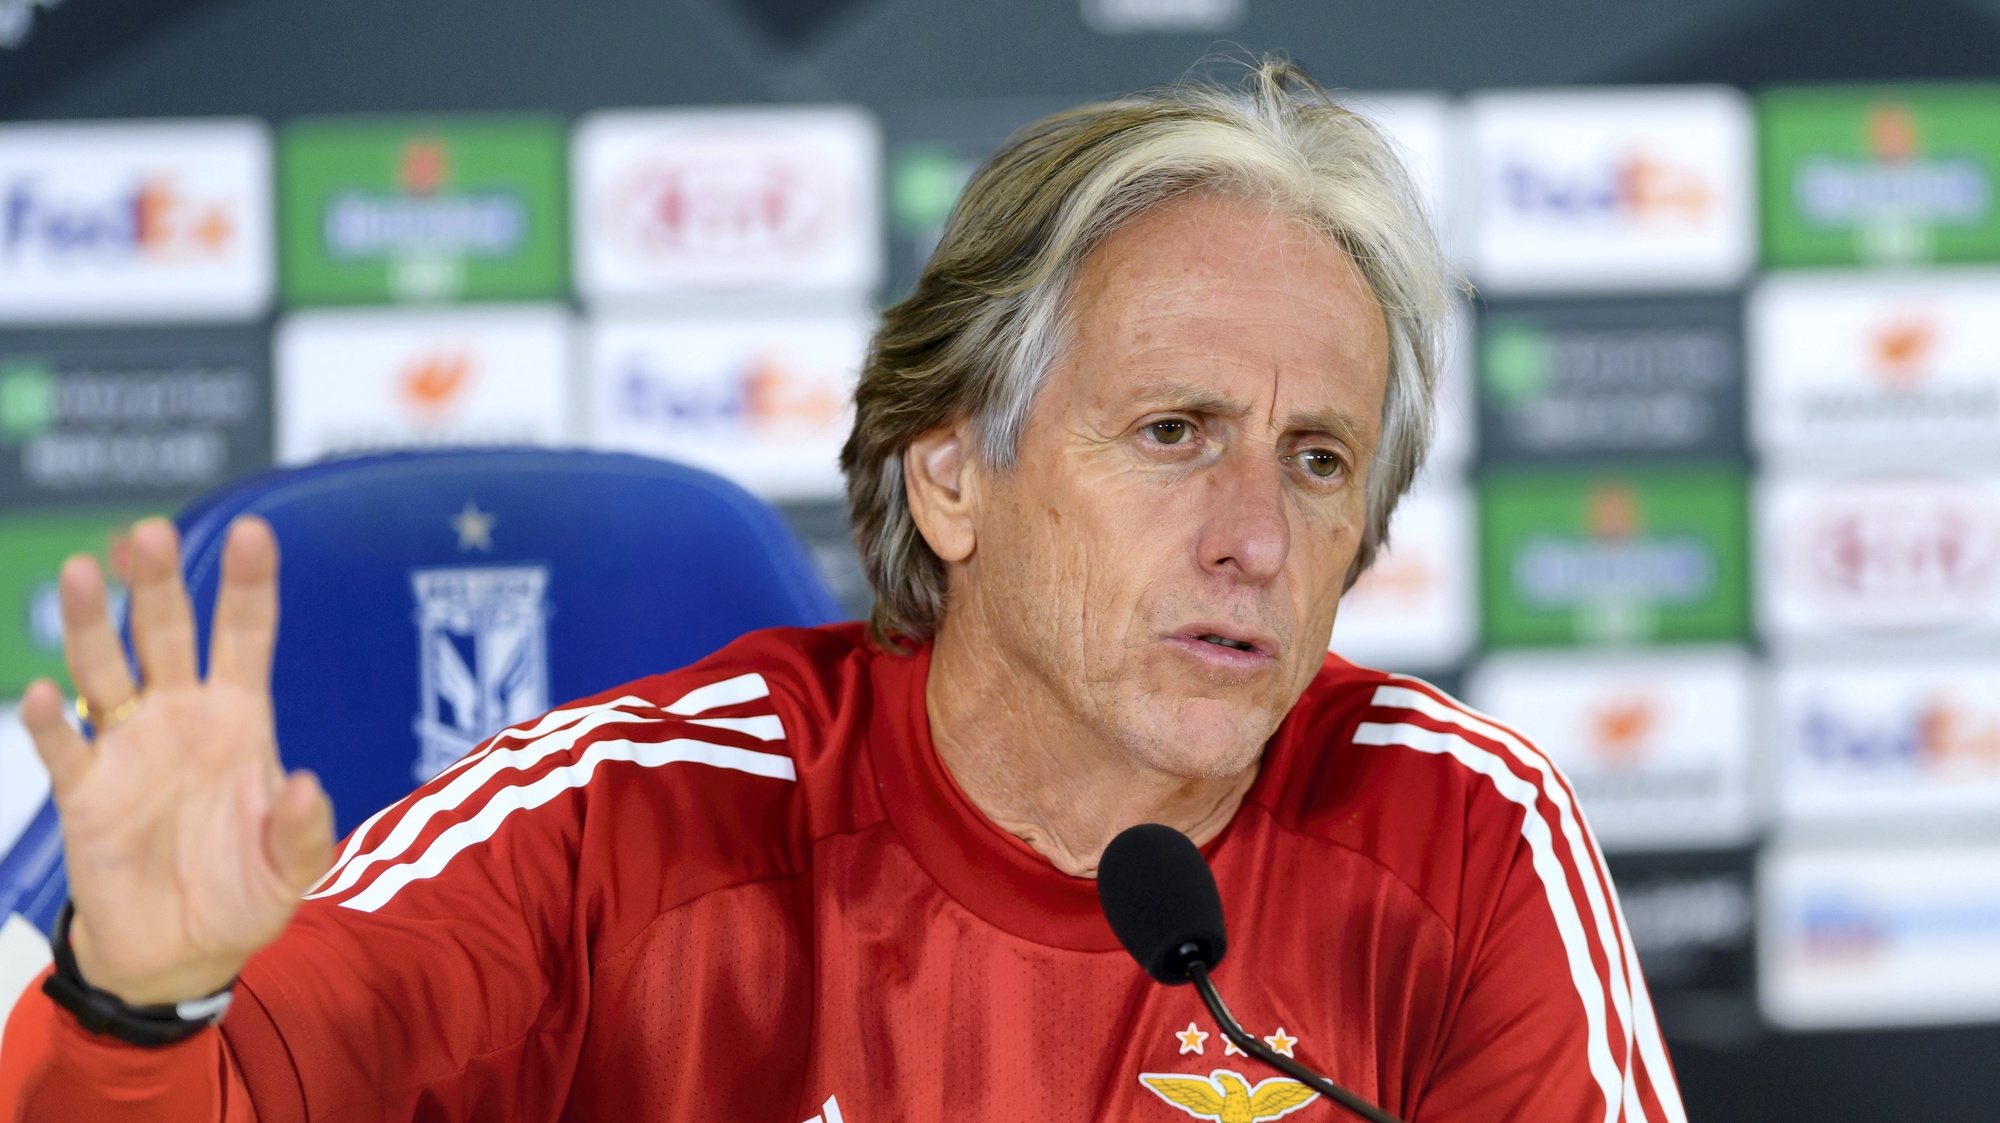 epa08762695 SL Benfica&#039;s head coach Jorge Jesus during a press conference in Poznan, central Poland, 21 October 2020. SL Benfica faces Lech Poznan for an UEFA Europa League group D match on 22 October in Poznan.  EPA/Jakub Kaczmarczyk POLAND OUT